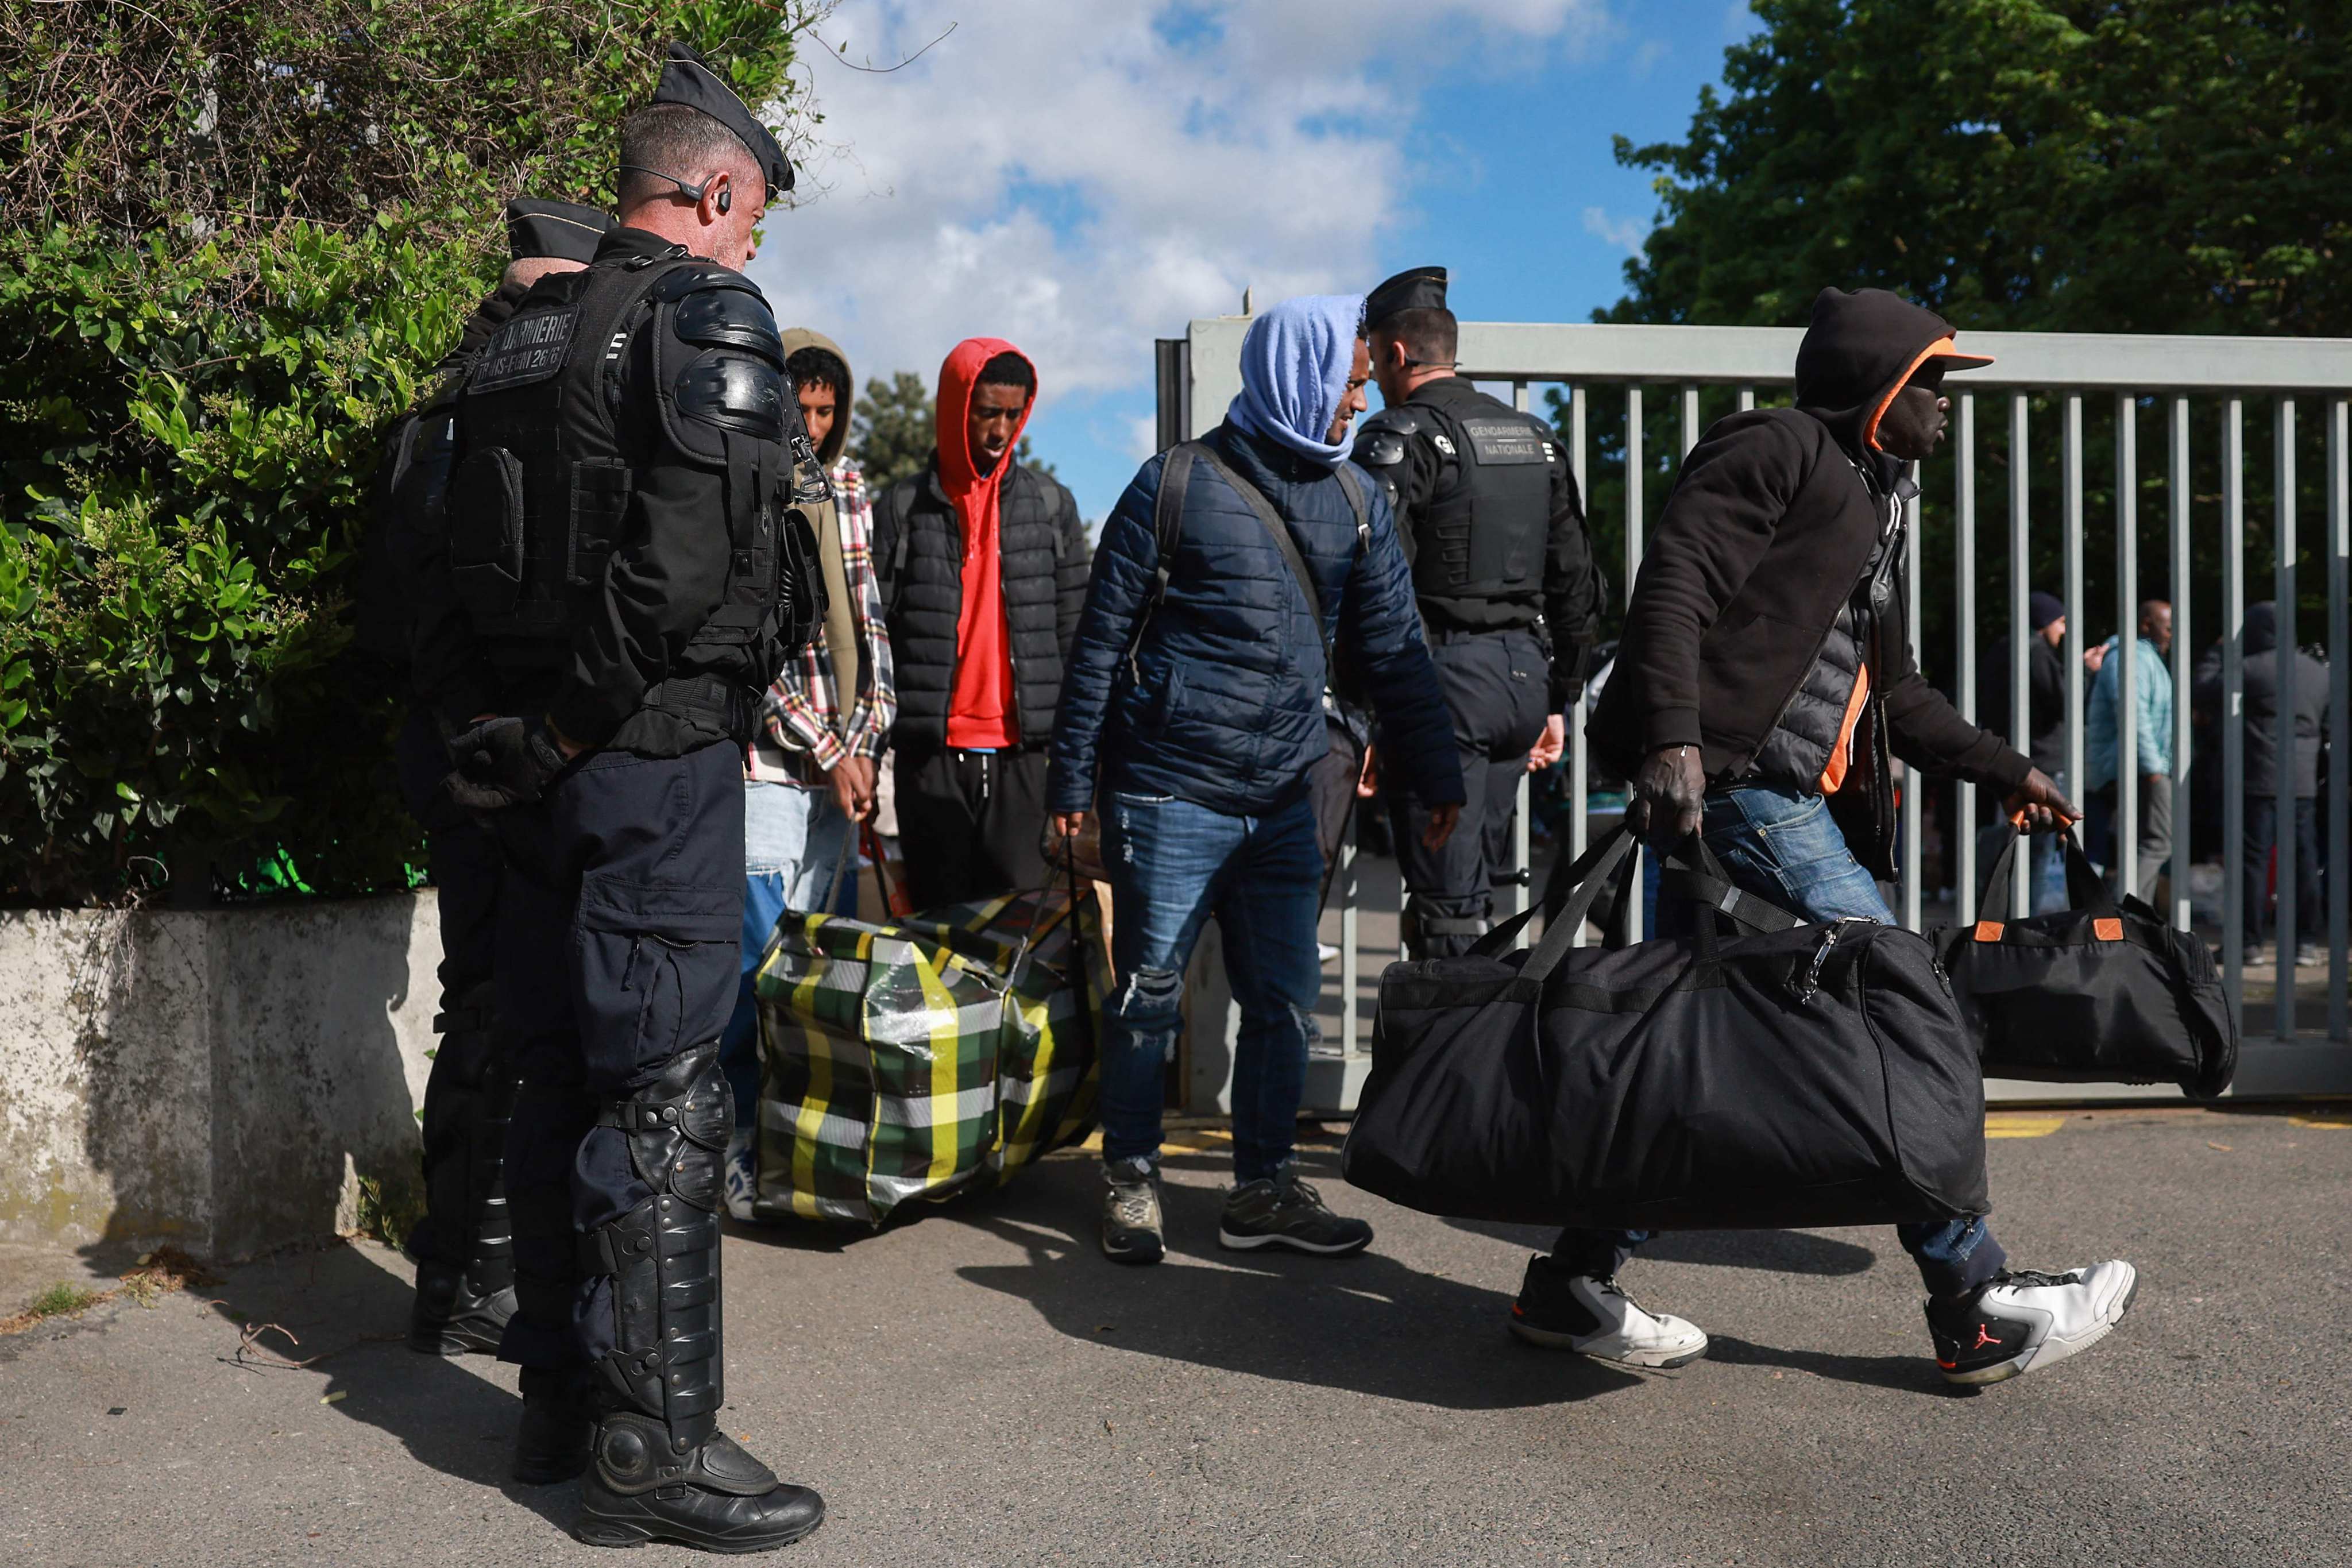 French gendarmes stand guard next to migrants leaving for another location, during the evacuation of France’s biggest squat. Photo: AFP